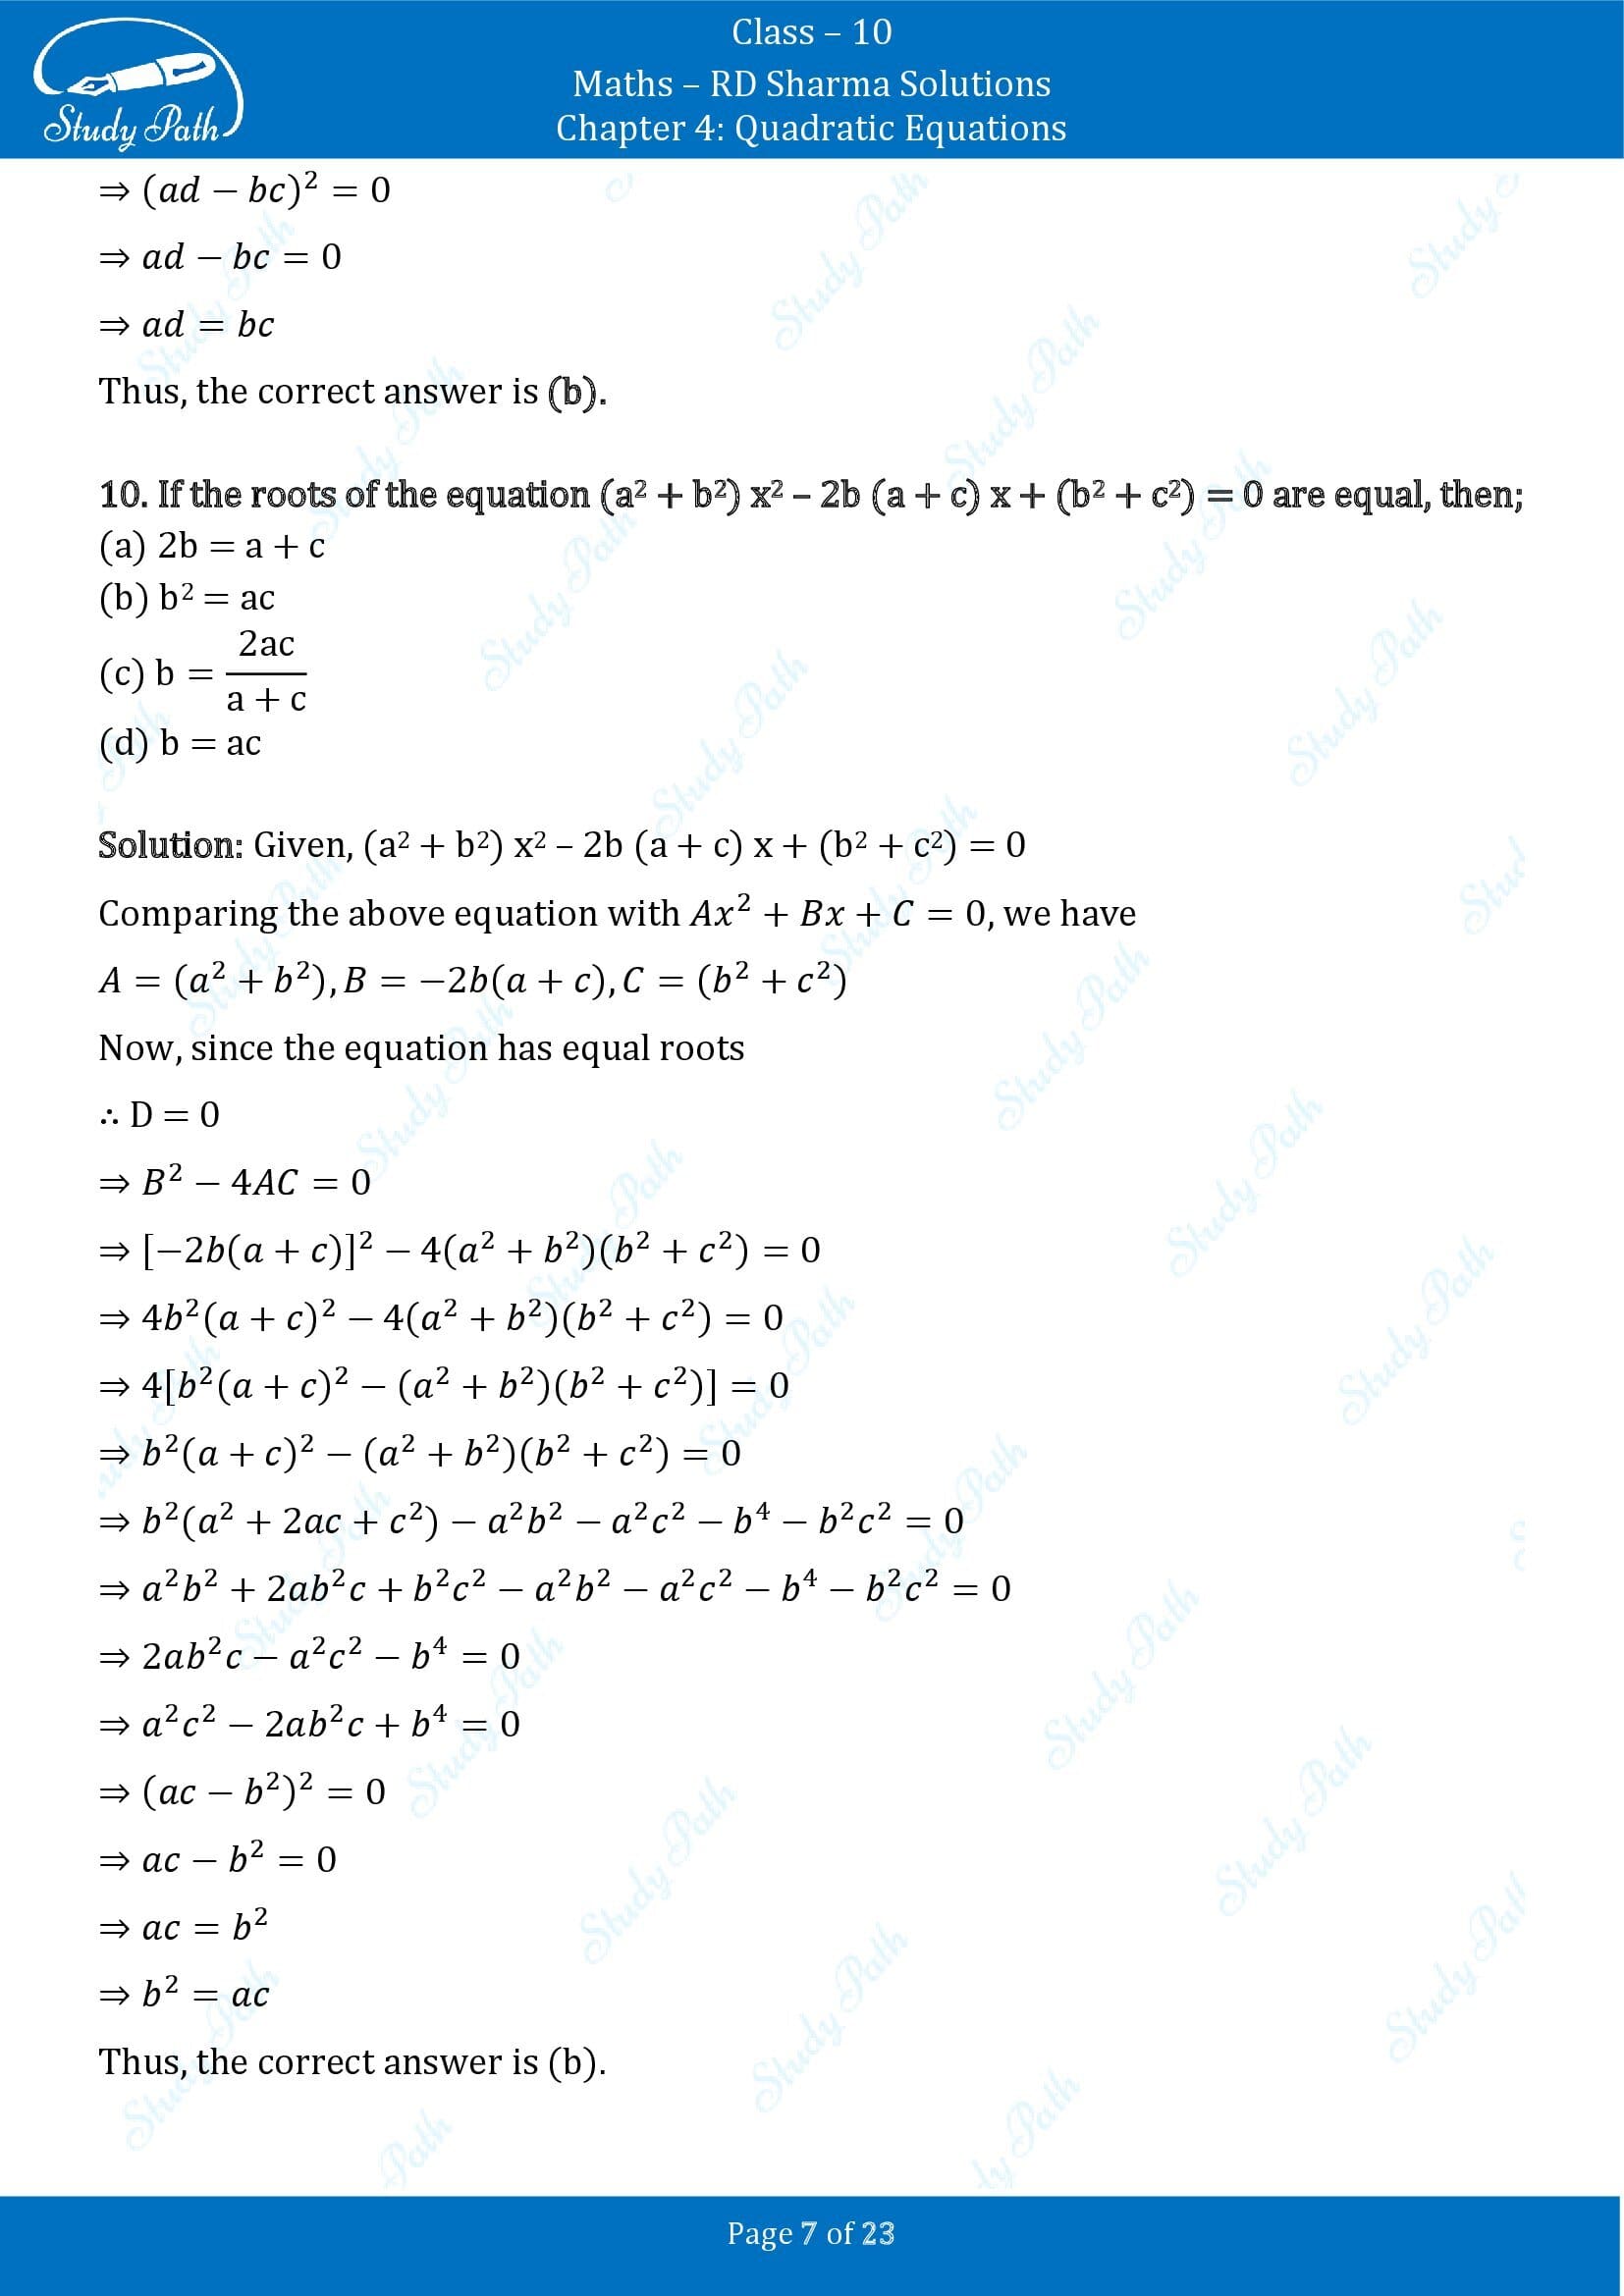 RD Sharma Solutions Class 10 Chapter 4 Quadratic Equations Multiple Choice Questions MCQs 00007